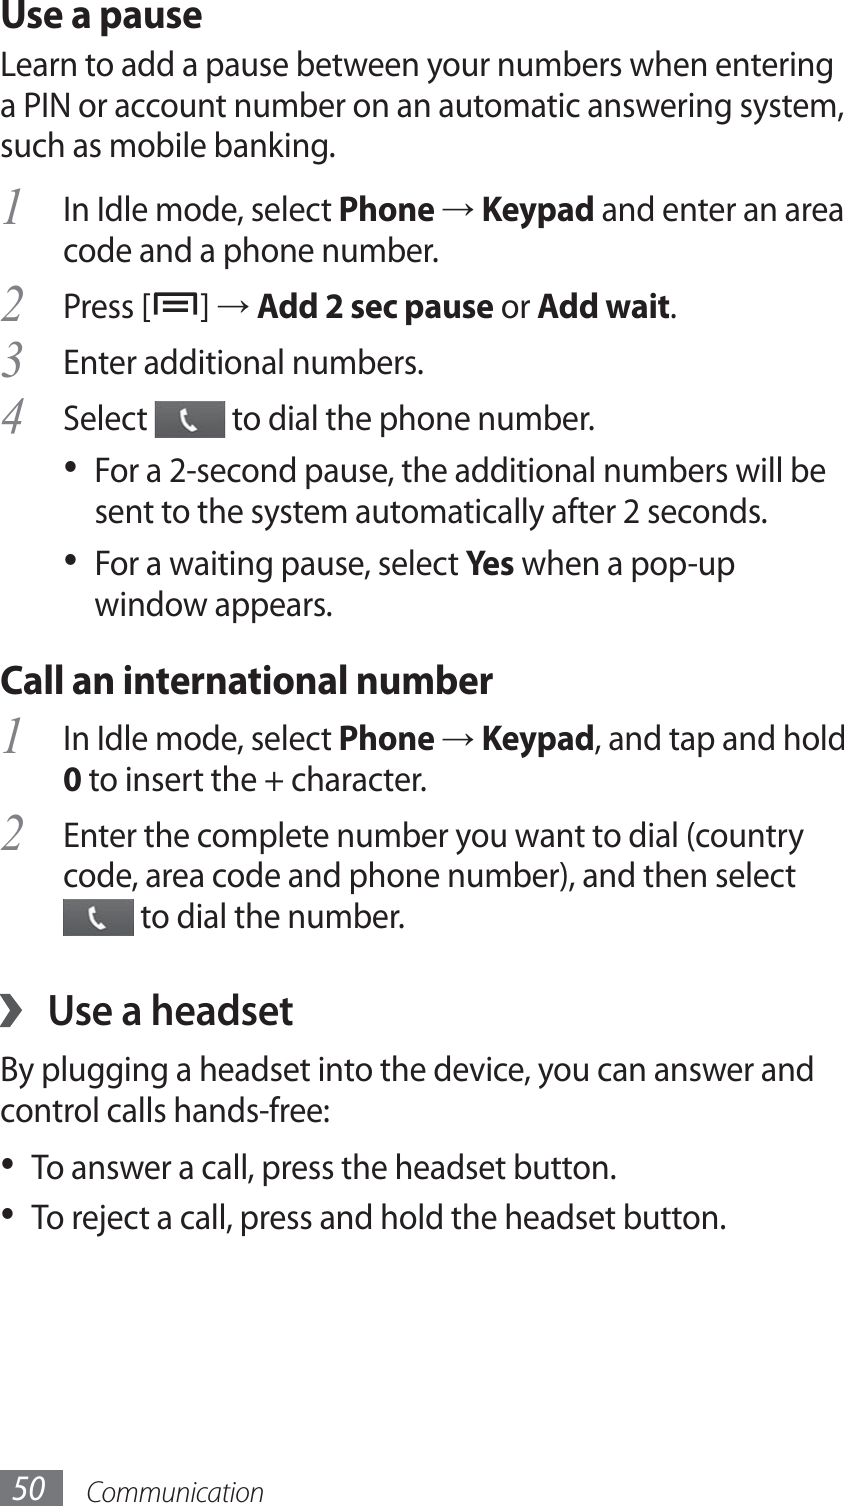 Communication50Use a pauseLearn to add a pause between your numbers when entering a PIN or account number on an automatic answering system, such as mobile banking.In Idle mode, select 1 Phone → Keypad and enter an area code and a phone number.Press [2 ] → Add 2 sec pause or Add wait.Enter additional numbers.3 Select 4  to dial the phone number.For a 2-second pause, the additional numbers will be • sent to the system automatically after 2 seconds.For a waiting pause, select •  Yes when a pop-up window appears.Call an international numberIn Idle mode, select 1 Phone → Keypad, and tap and hold 0 to insert the + character. Enter the complete number you want to dial (country 2 code, area code and phone number), and then select  to dial the number.Use a headset ›By plugging a headset into the device, you can answer and control calls hands-free:To answer a call, press the headset button.• To reject a call, press and hold the headset button.• 